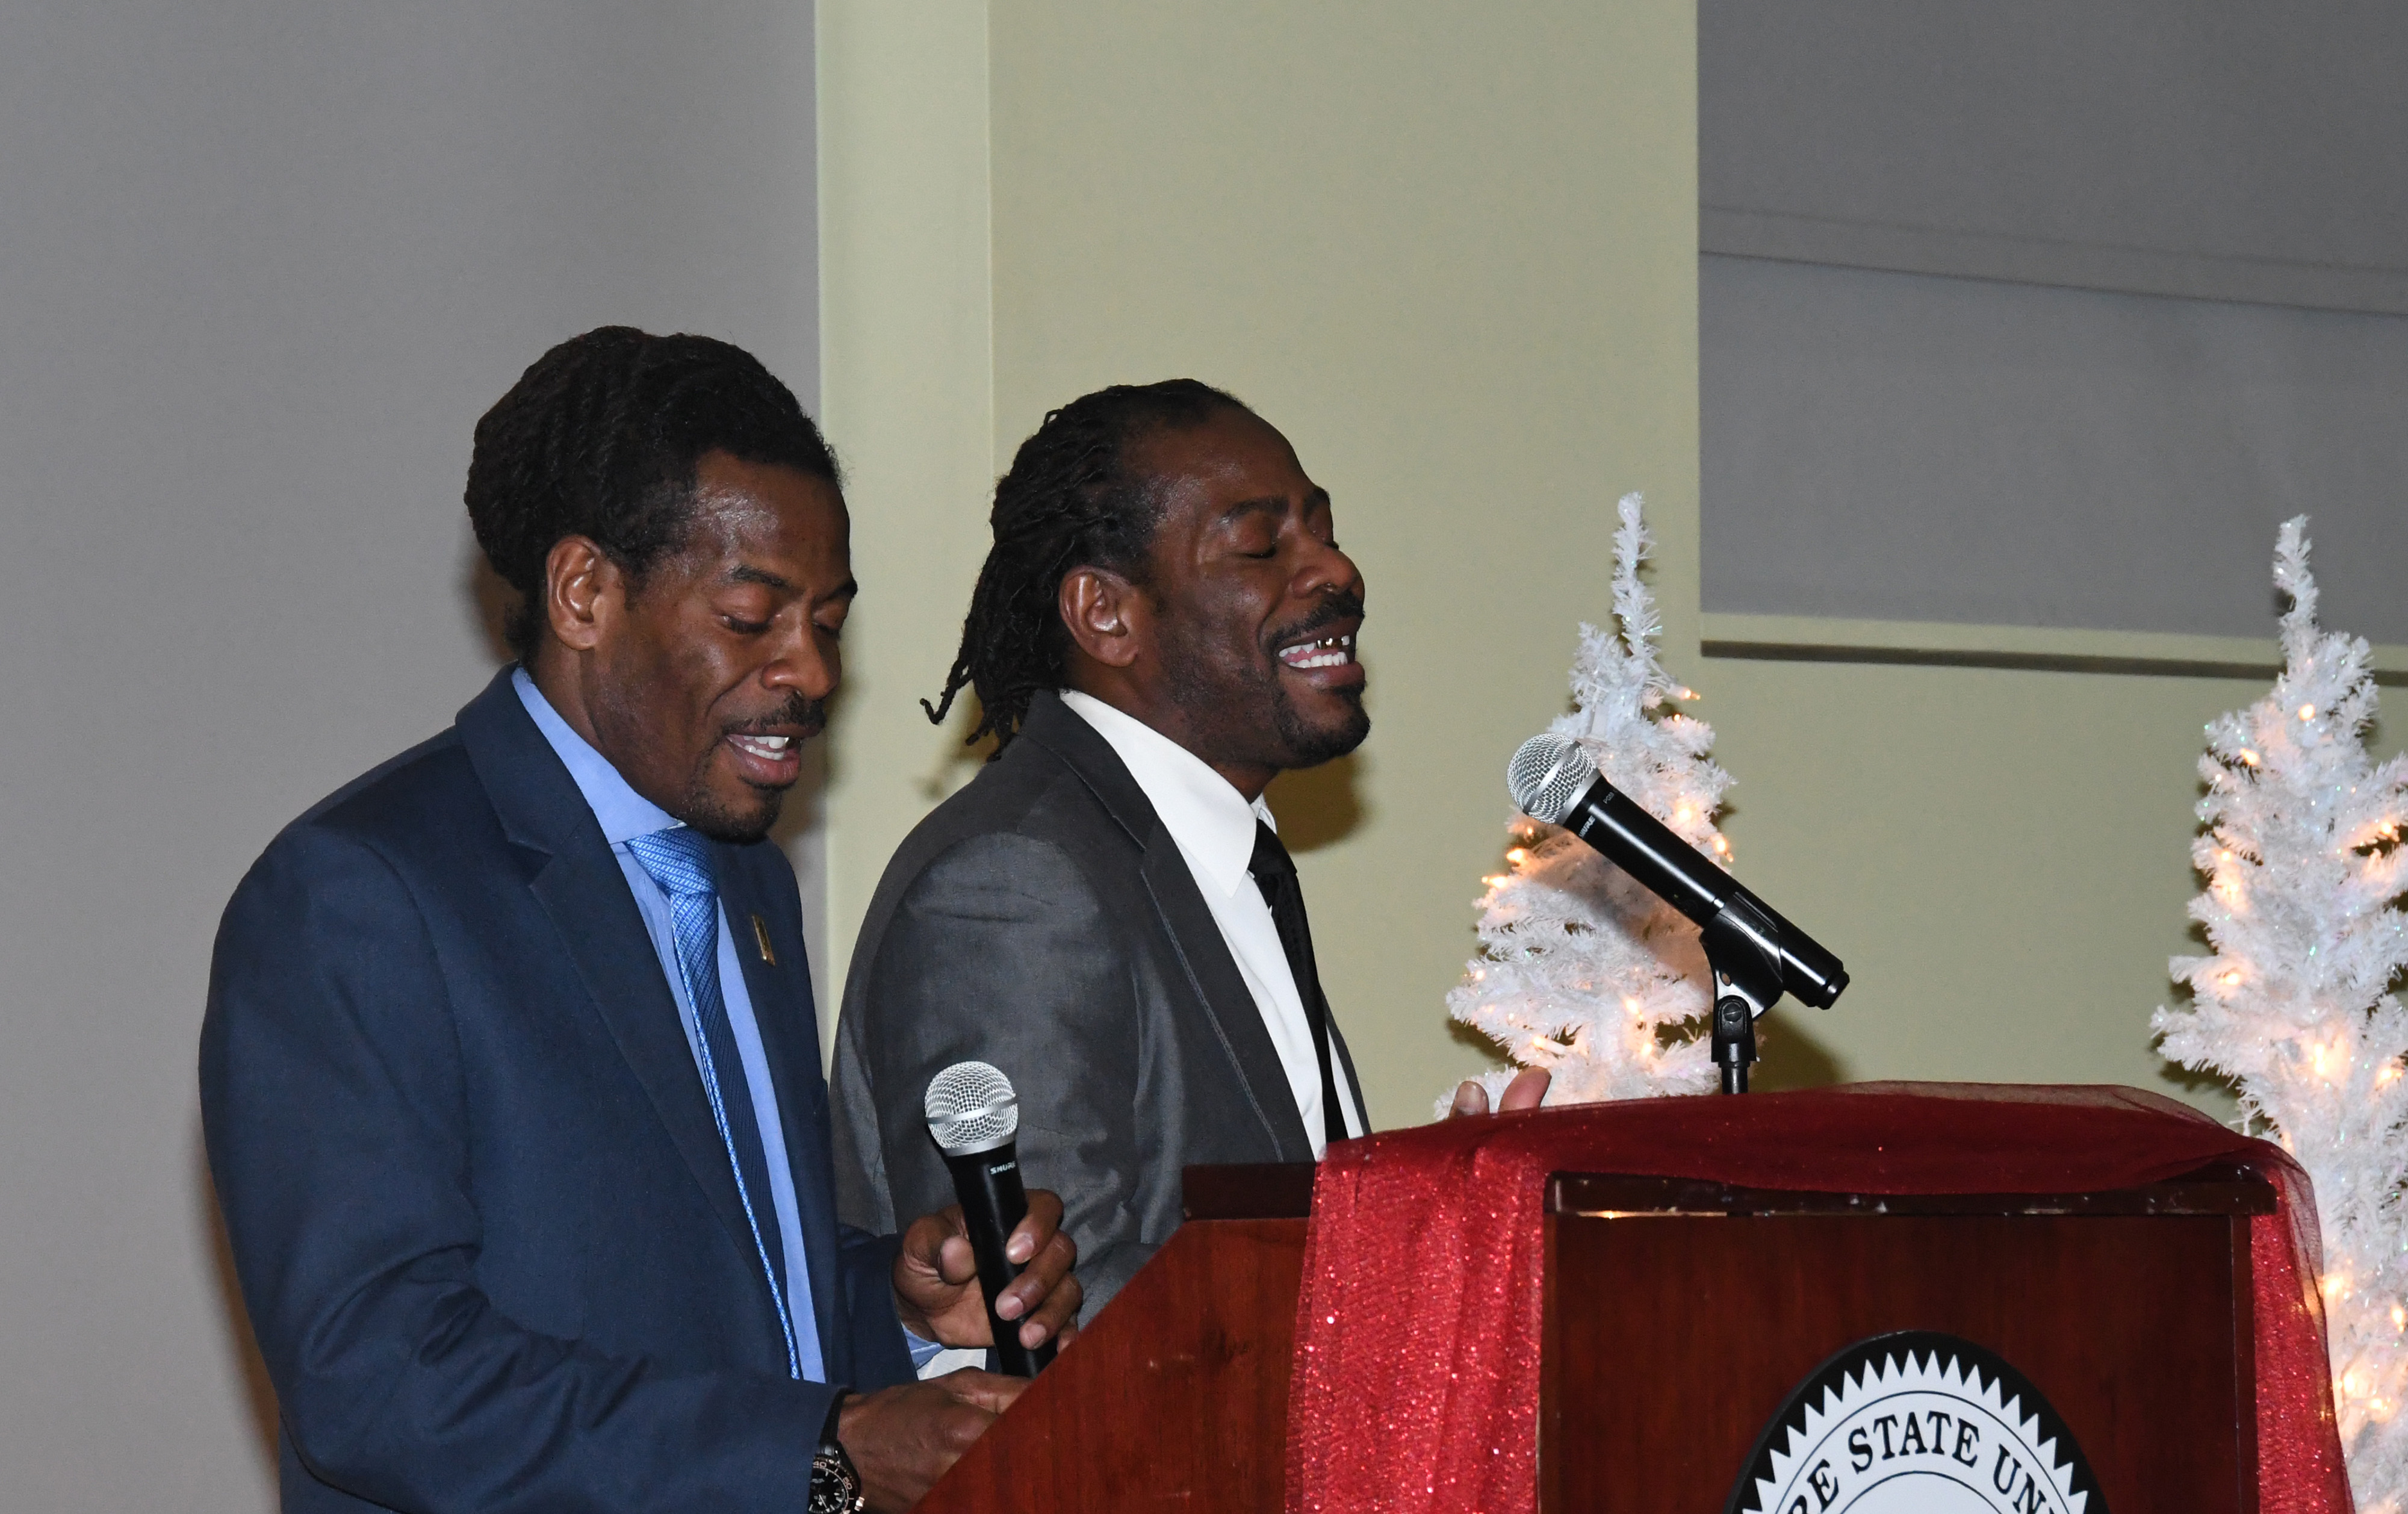 The Twin Poets -- University alumnus and Delaware Poet Laureates -- blessed the attending graduating seniors with some inspiring spoken words works.